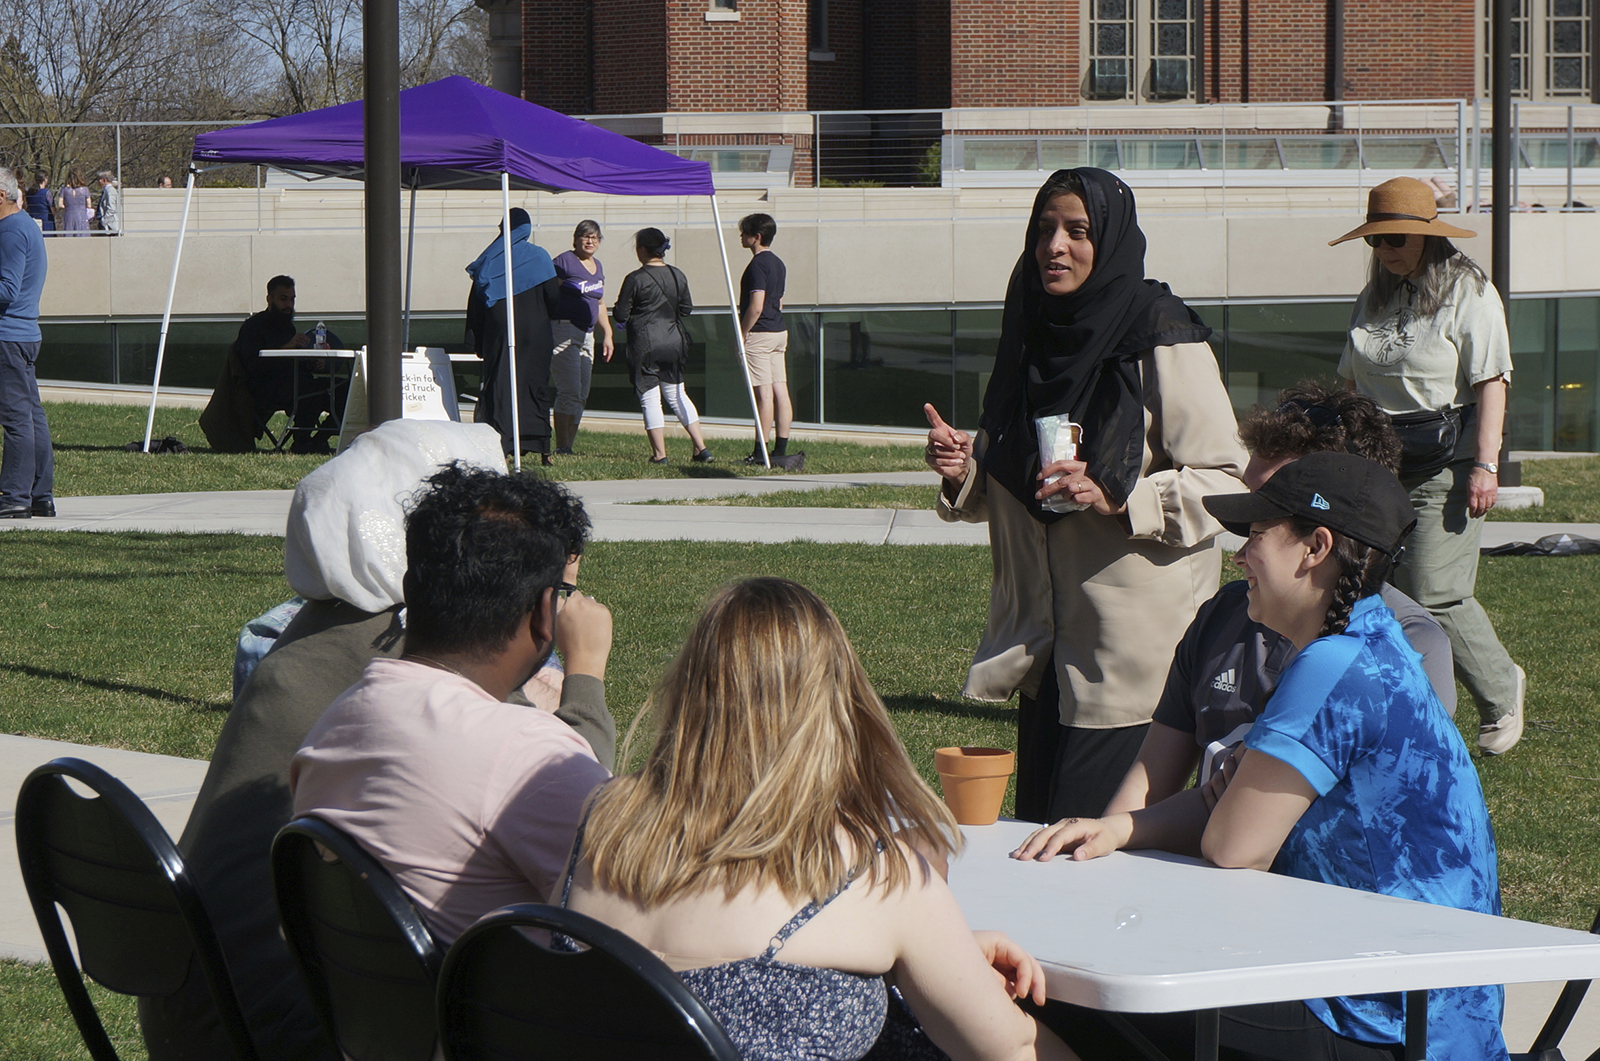 Sadaf Shier, standing, the Muslim chaplain at the University of St. Thomas, talks with students attending the school's celebration for the end of the Muslim holy month of Ramadan in St. Paul, Minn., on Saturday, May 7, 2022. She helped organize the event, which included several stress-reducing activities, as part of a broadening of the mission of campus ministry to address holistic student wellbeing. (AP Photo/Giovanna Dell'Orto)